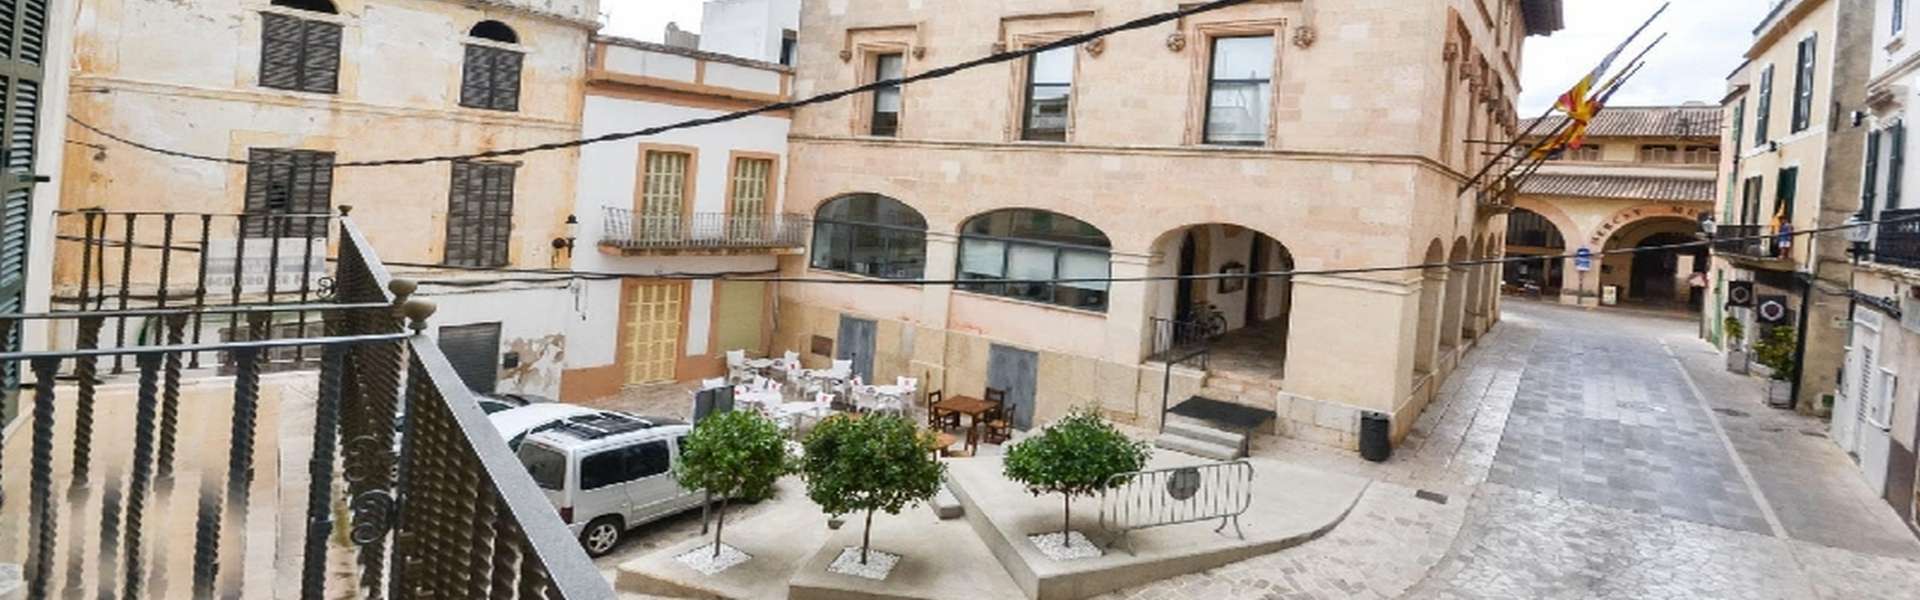 Apartment with an incomparable view of the historic town hall of Felanitx